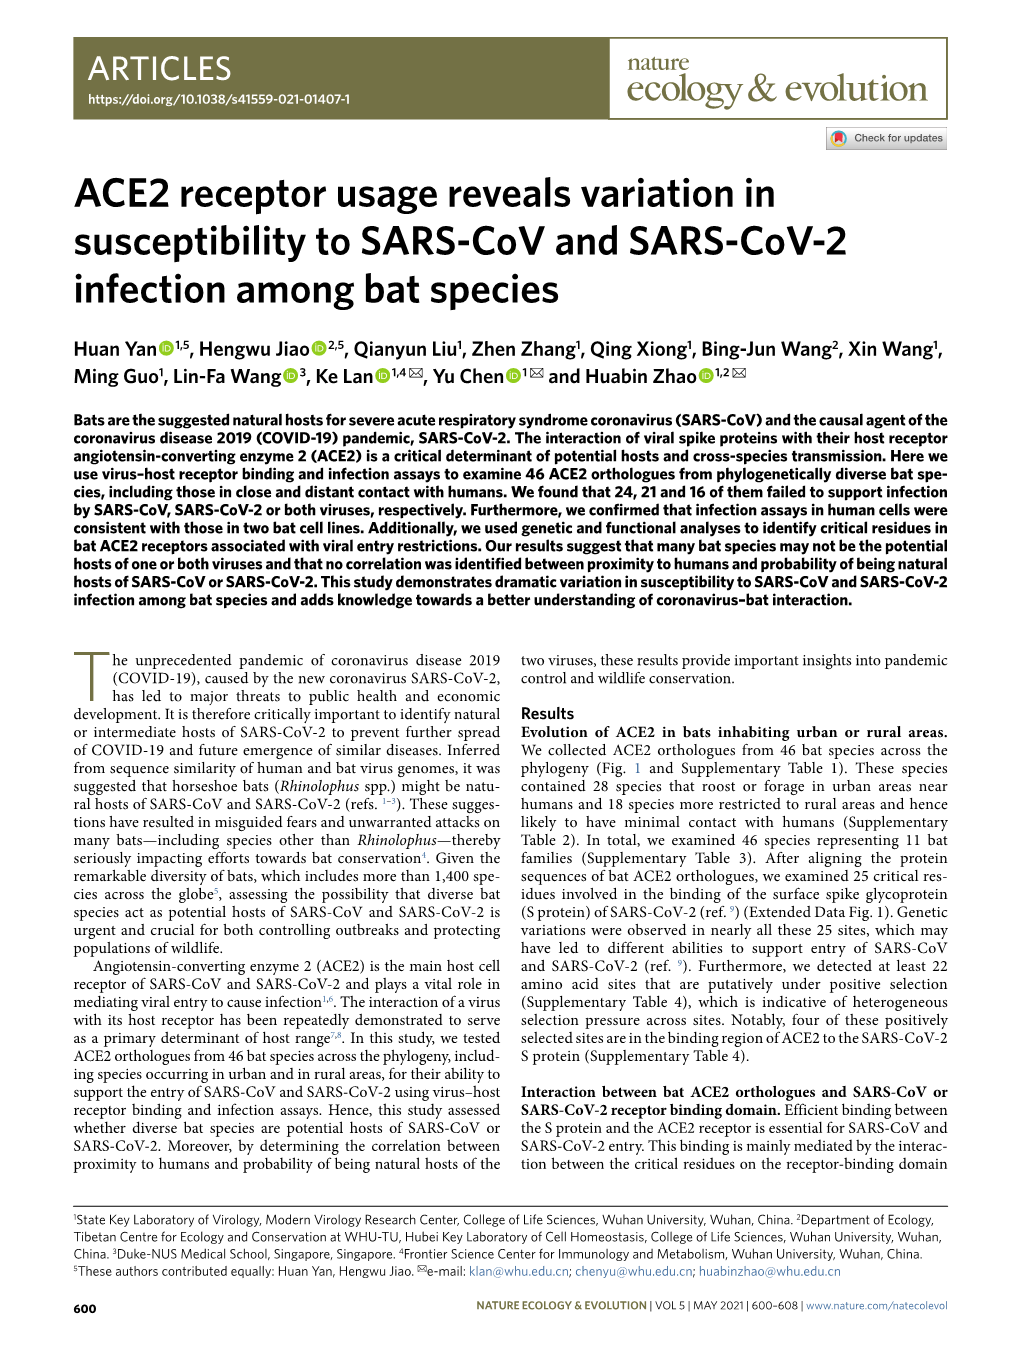 ACE2 Receptor Usage Reveals Variation in Susceptibility to SARS-Cov and SARS-Cov-2 Infection Among Bat Species